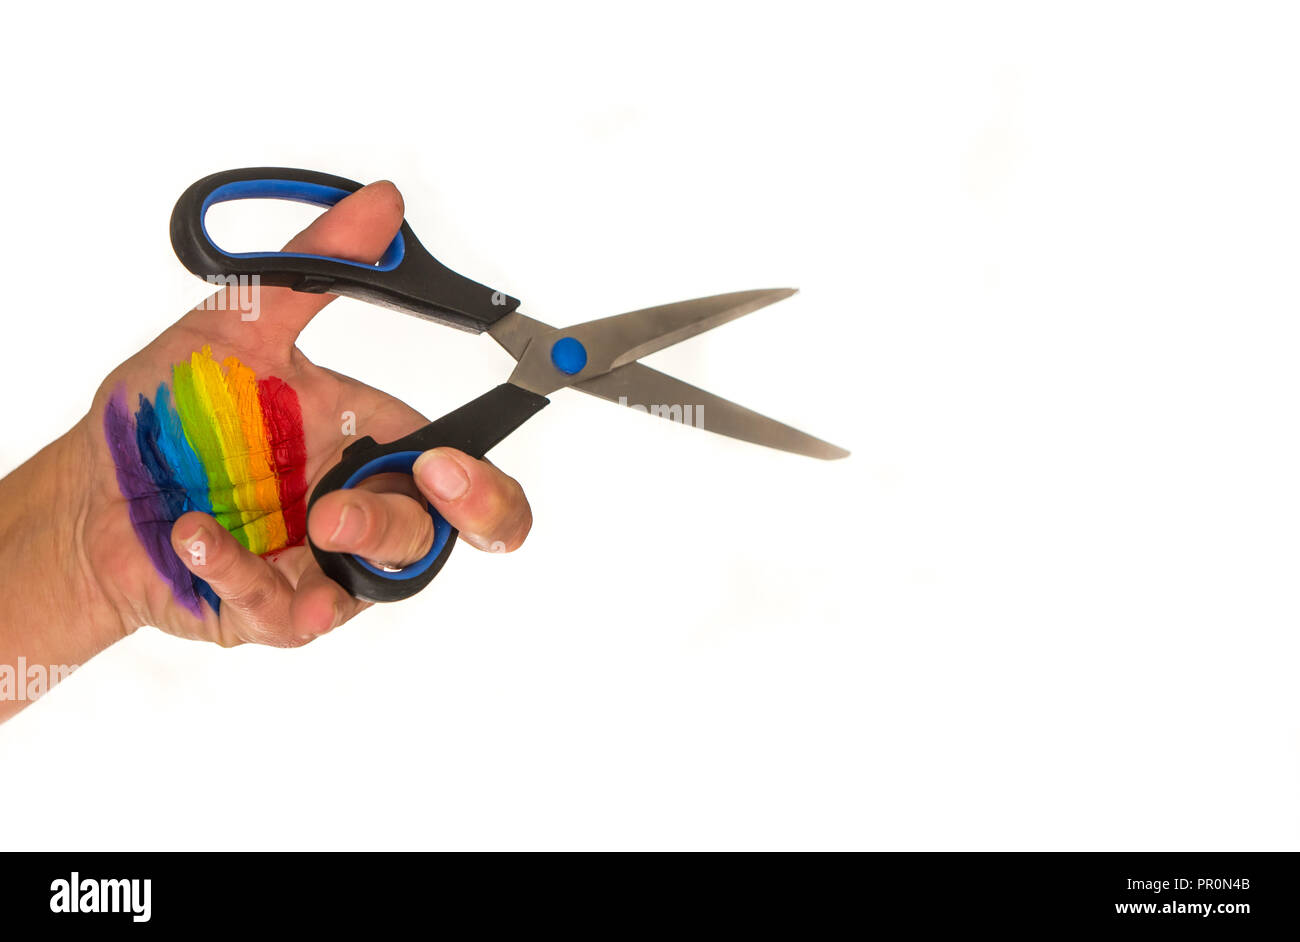 white background, at the back a blurred image of a woman with blonde hair, on the front hand holding scissors cutting the air. The hand painted in rai Stock Photo